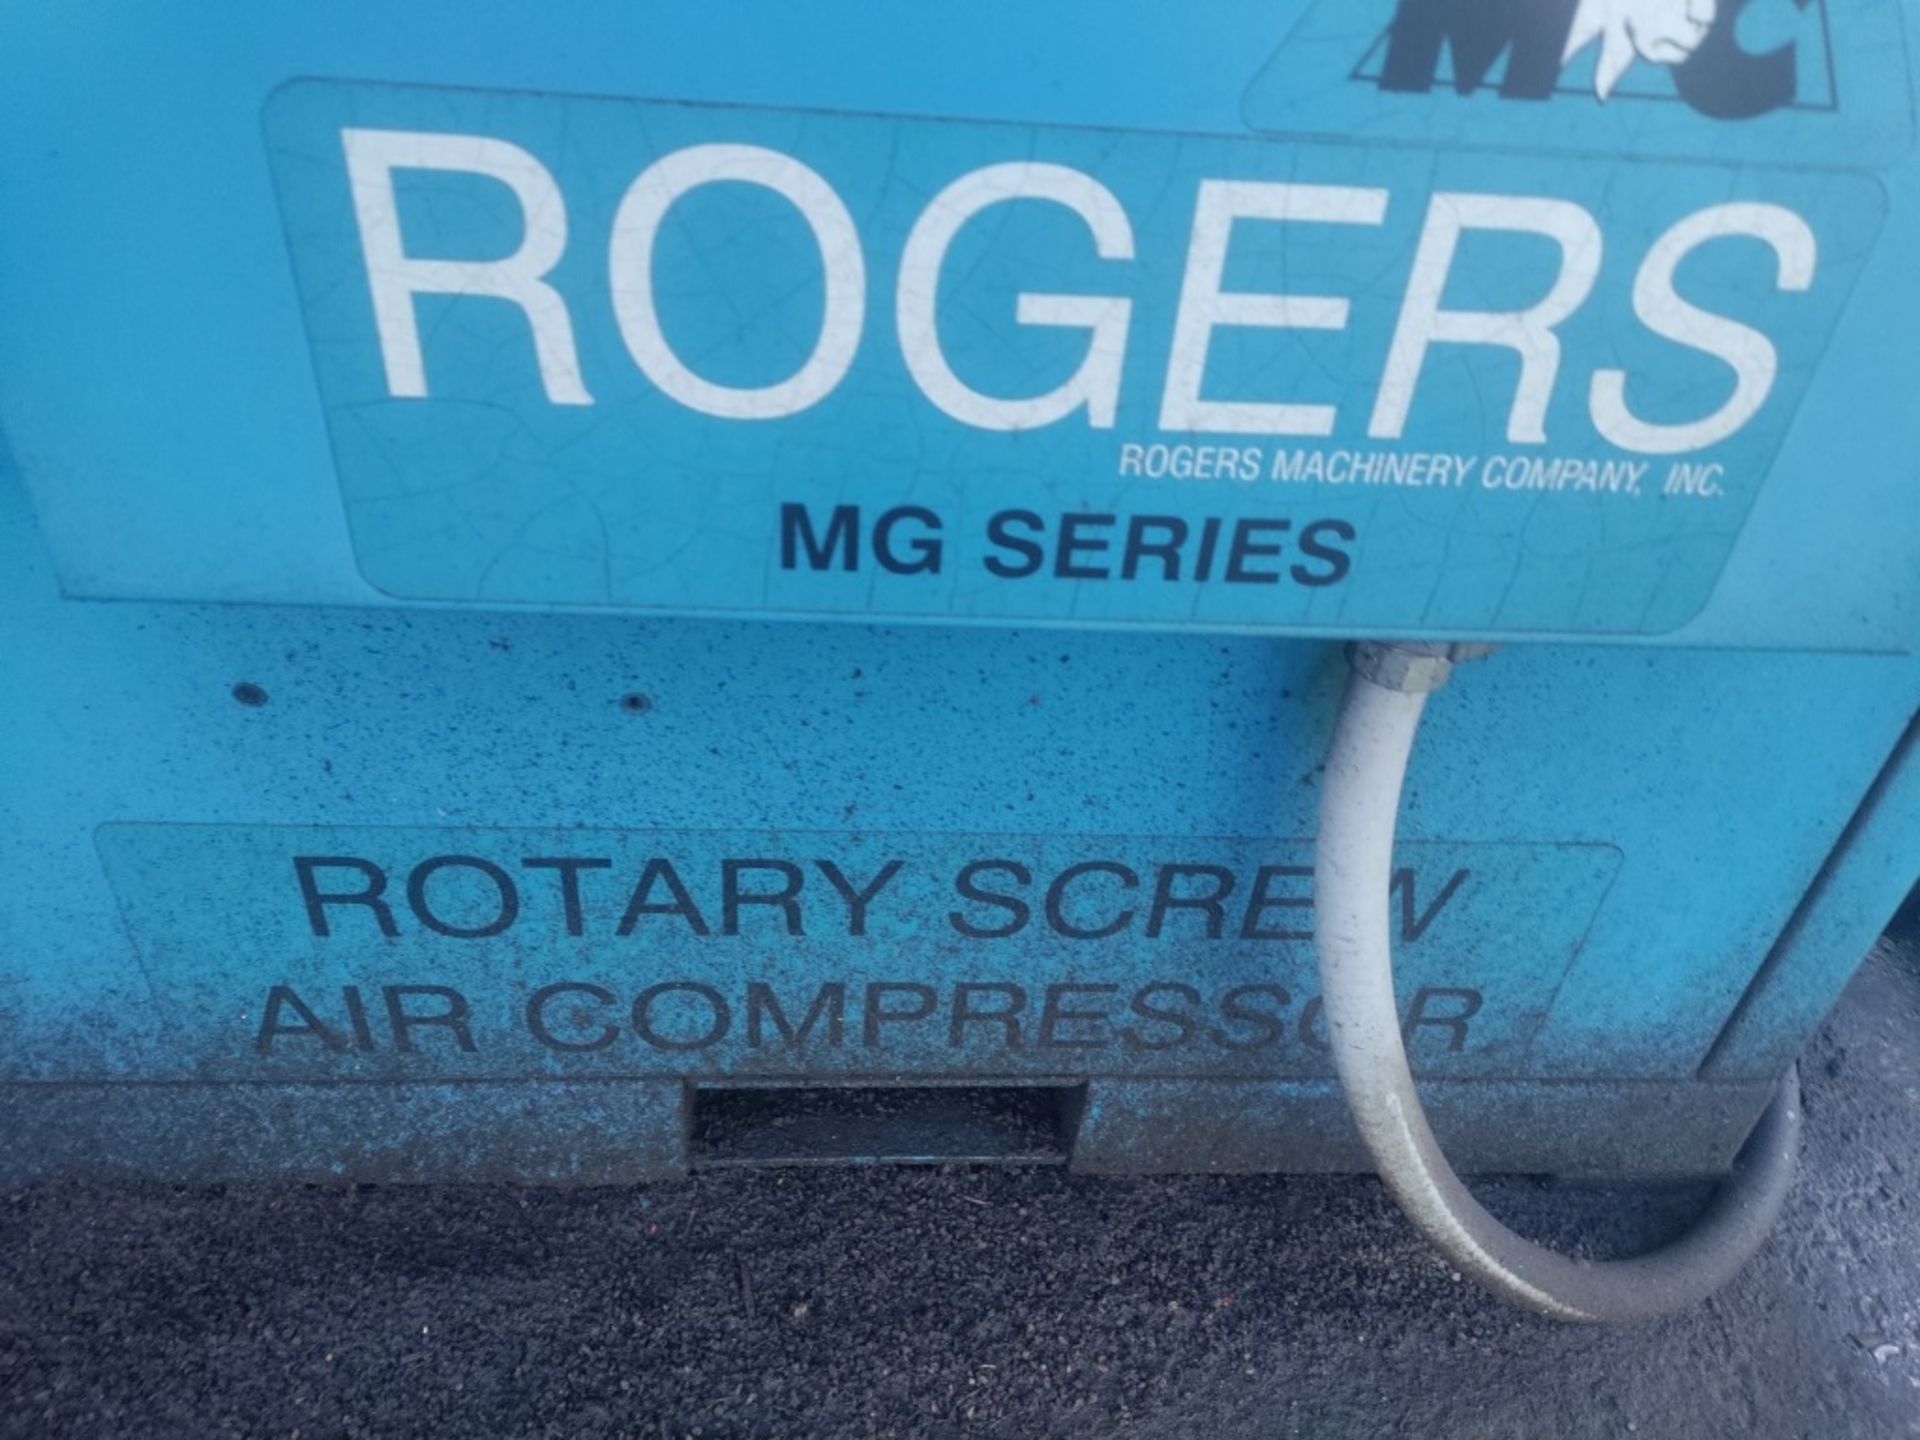 2001 Rogers MG Series Rotary Screw Air Compressor - Image 6 of 11